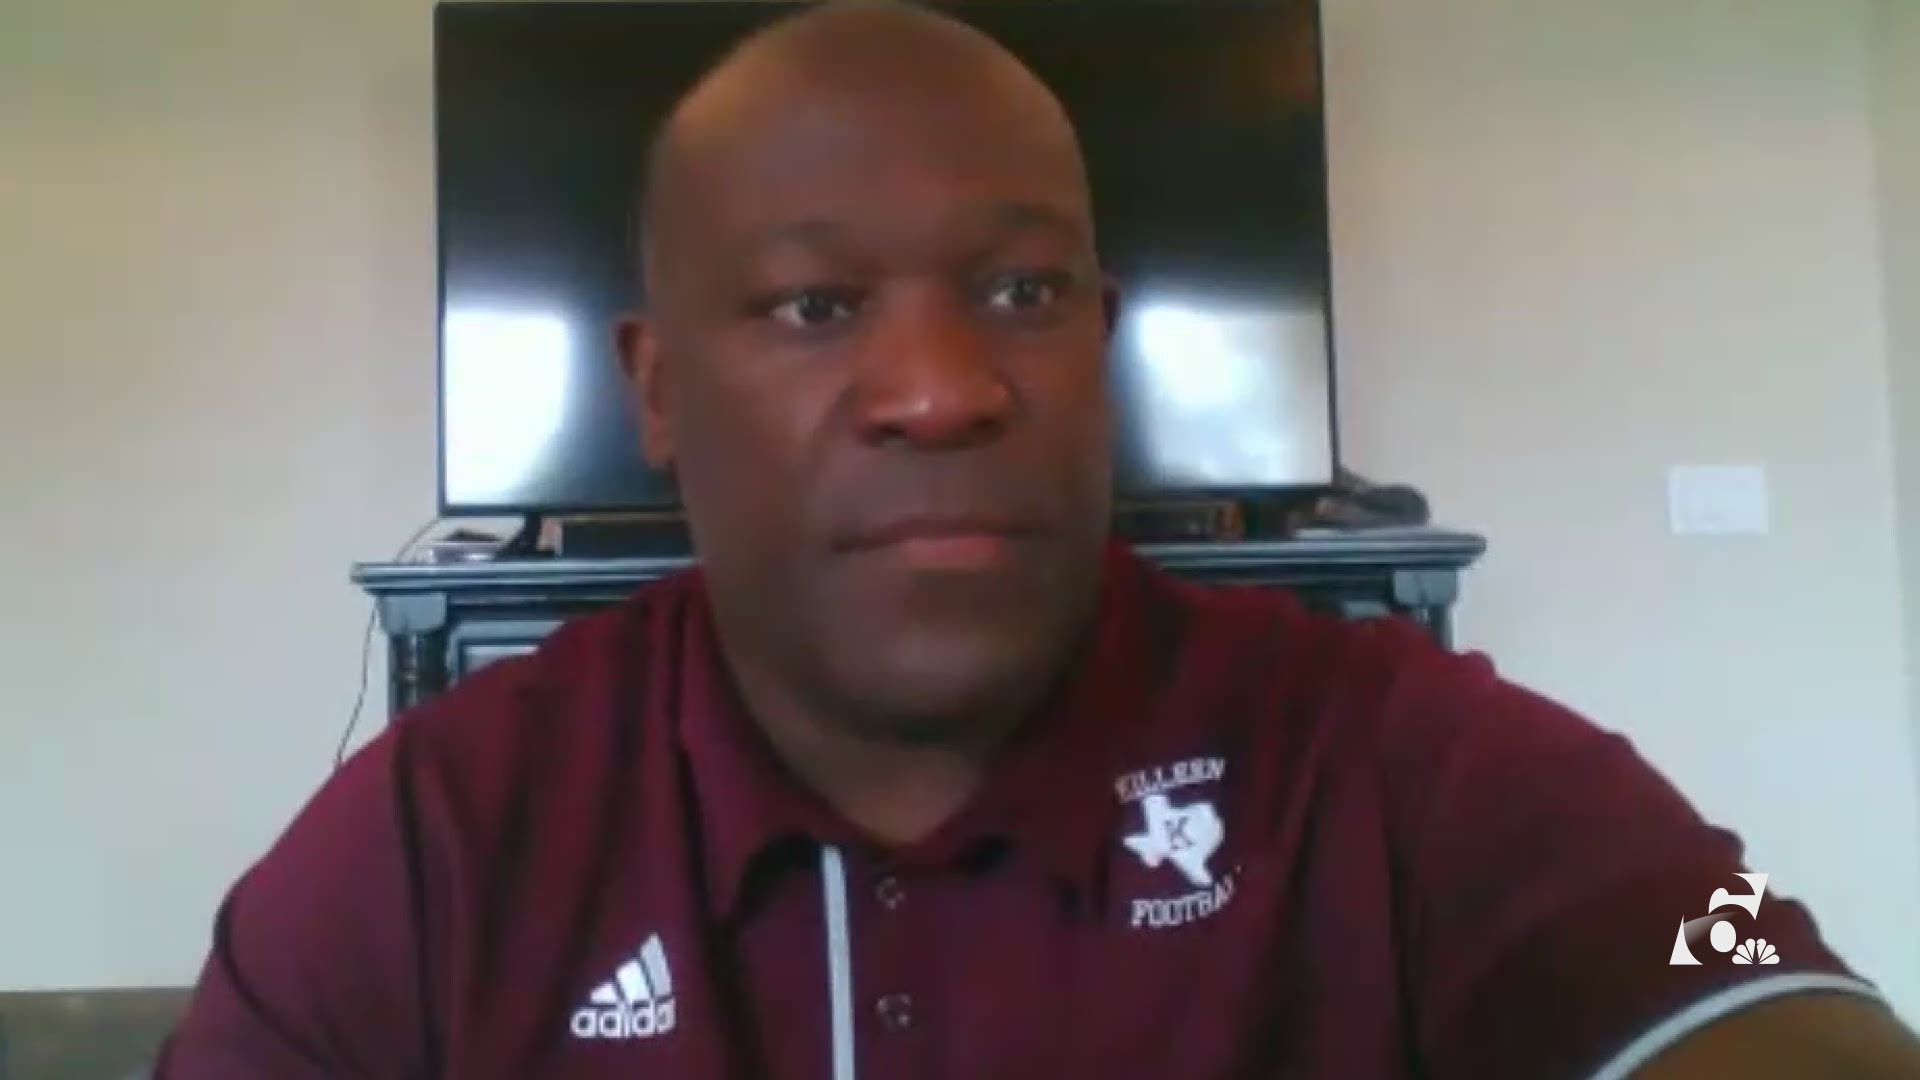 Killeen High School coach Neil Searcy talks about why his program agrees to beta test Recruiting Analystics for high school programs.